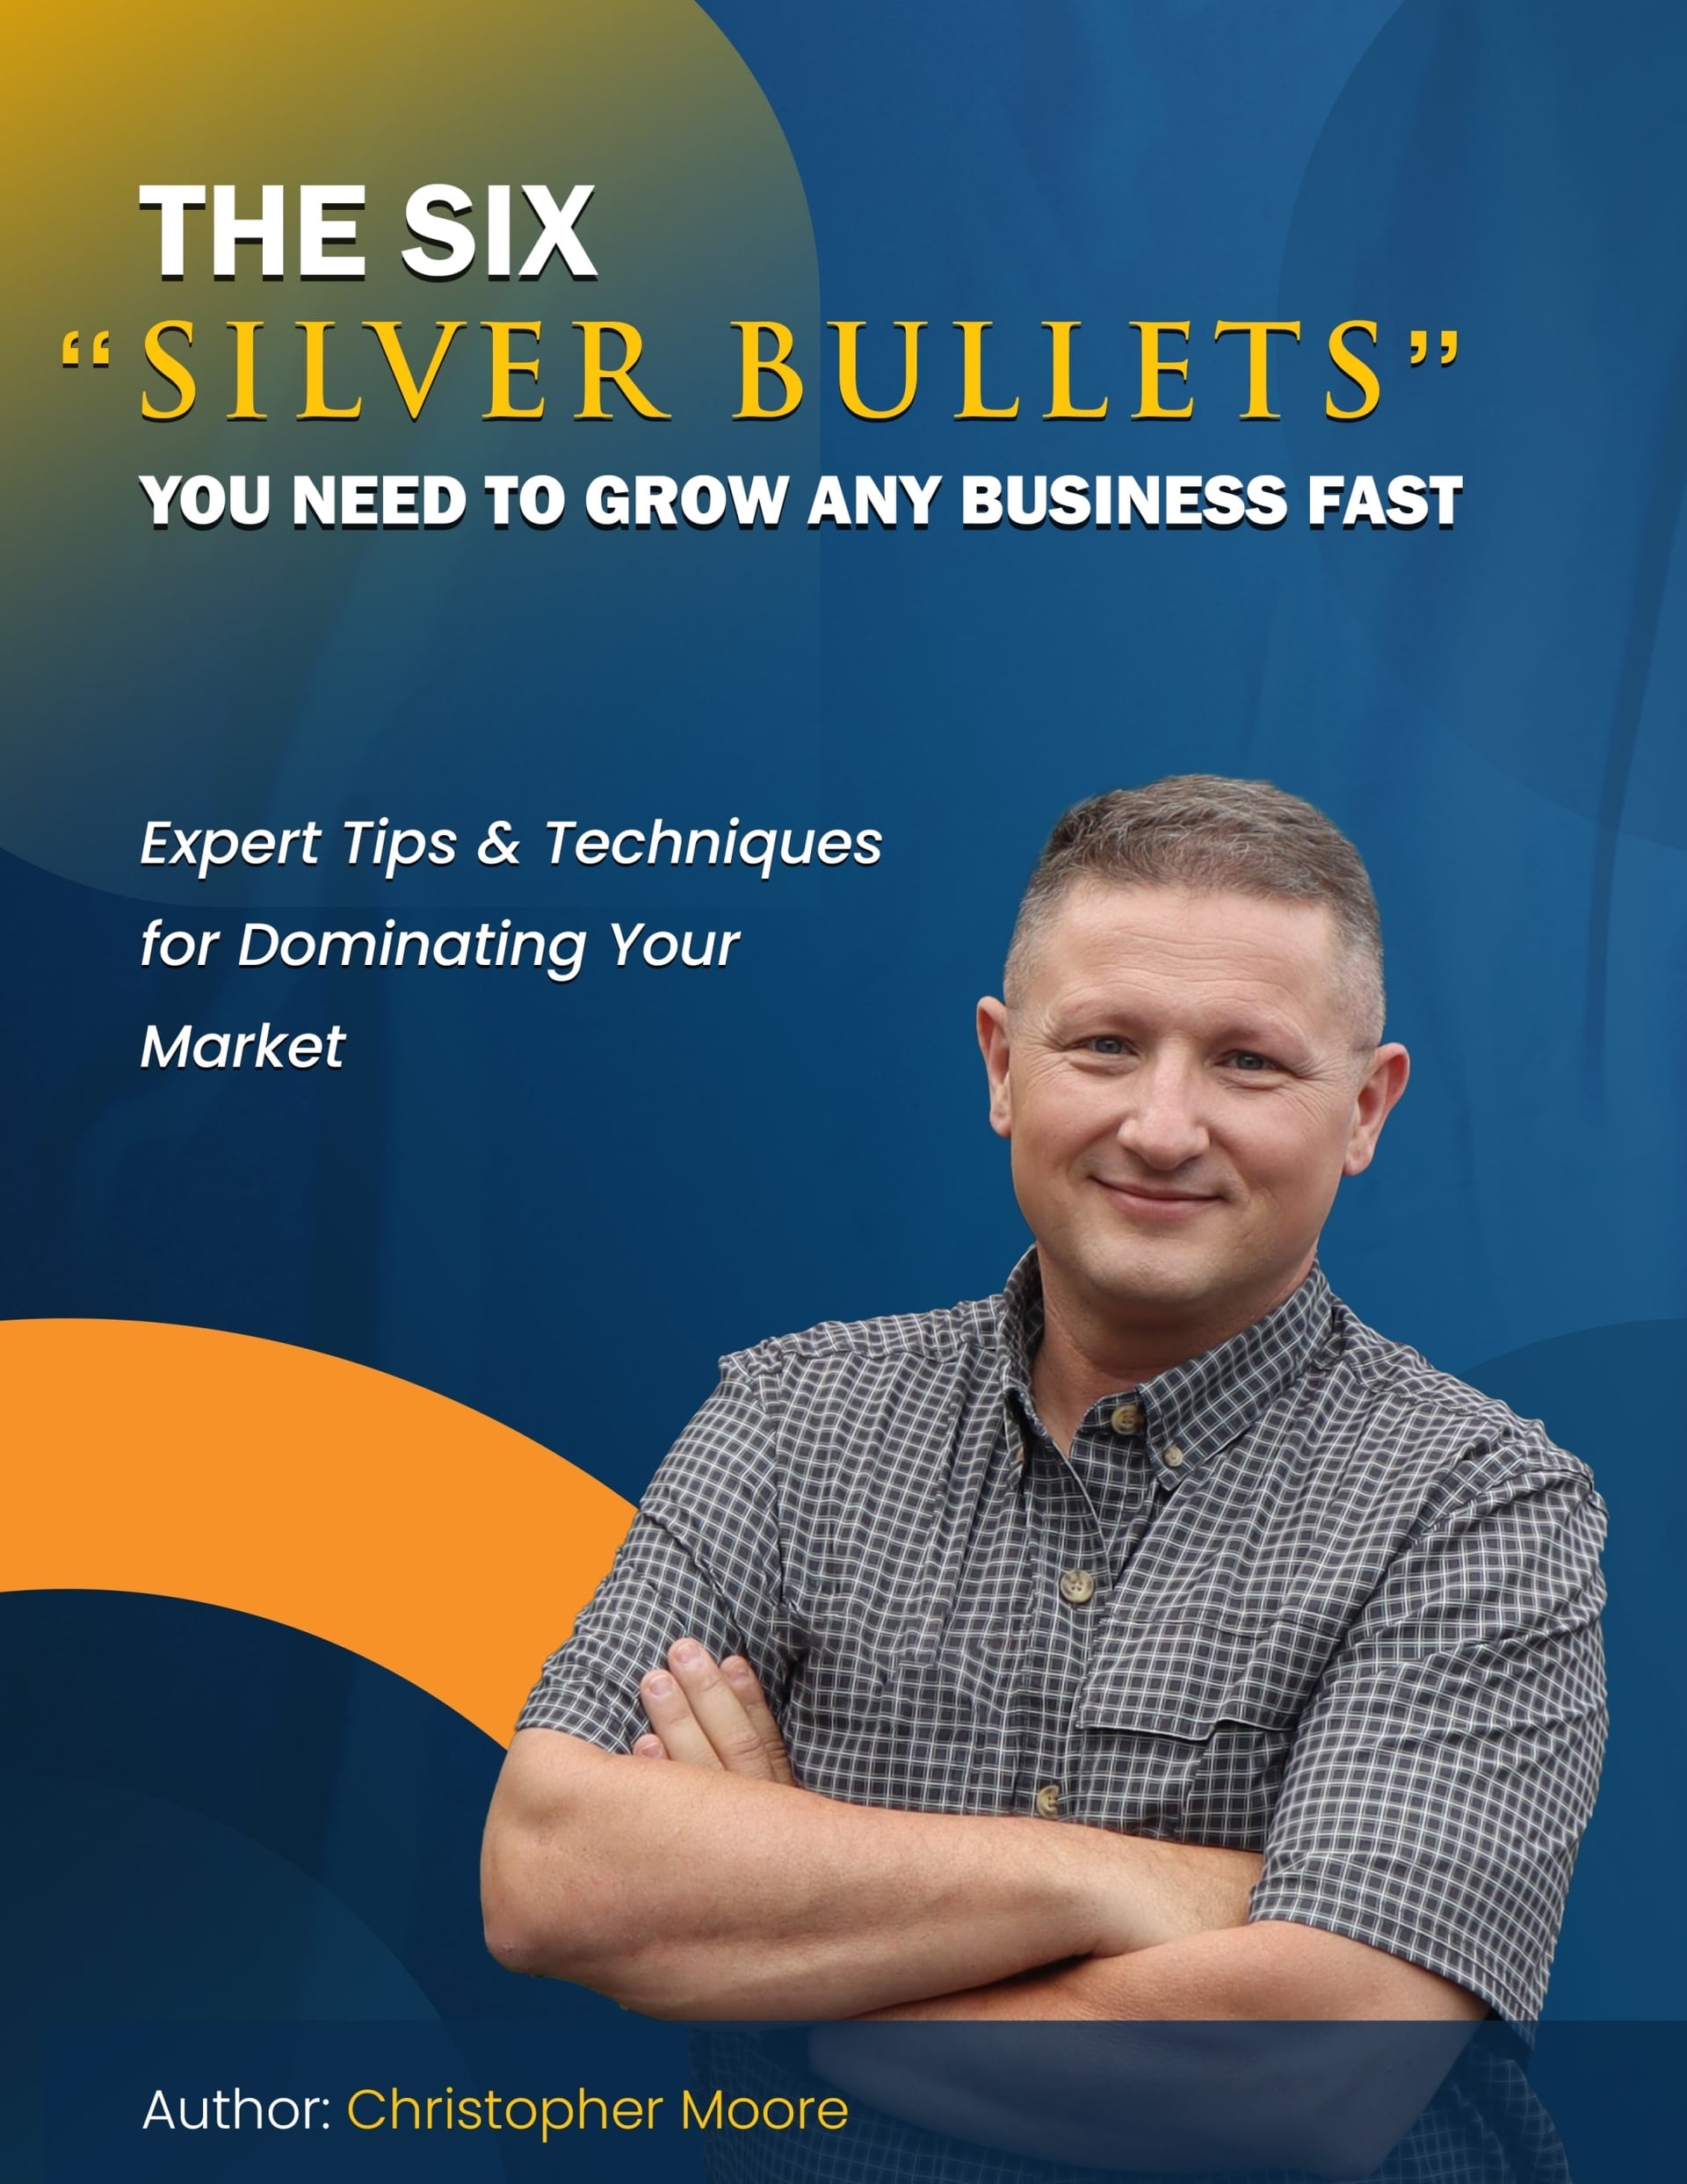 eBook cover for 'Six Silver Bullets to Grow Any Business FAST' displaying six flying silver bullets and an upward growth graph.